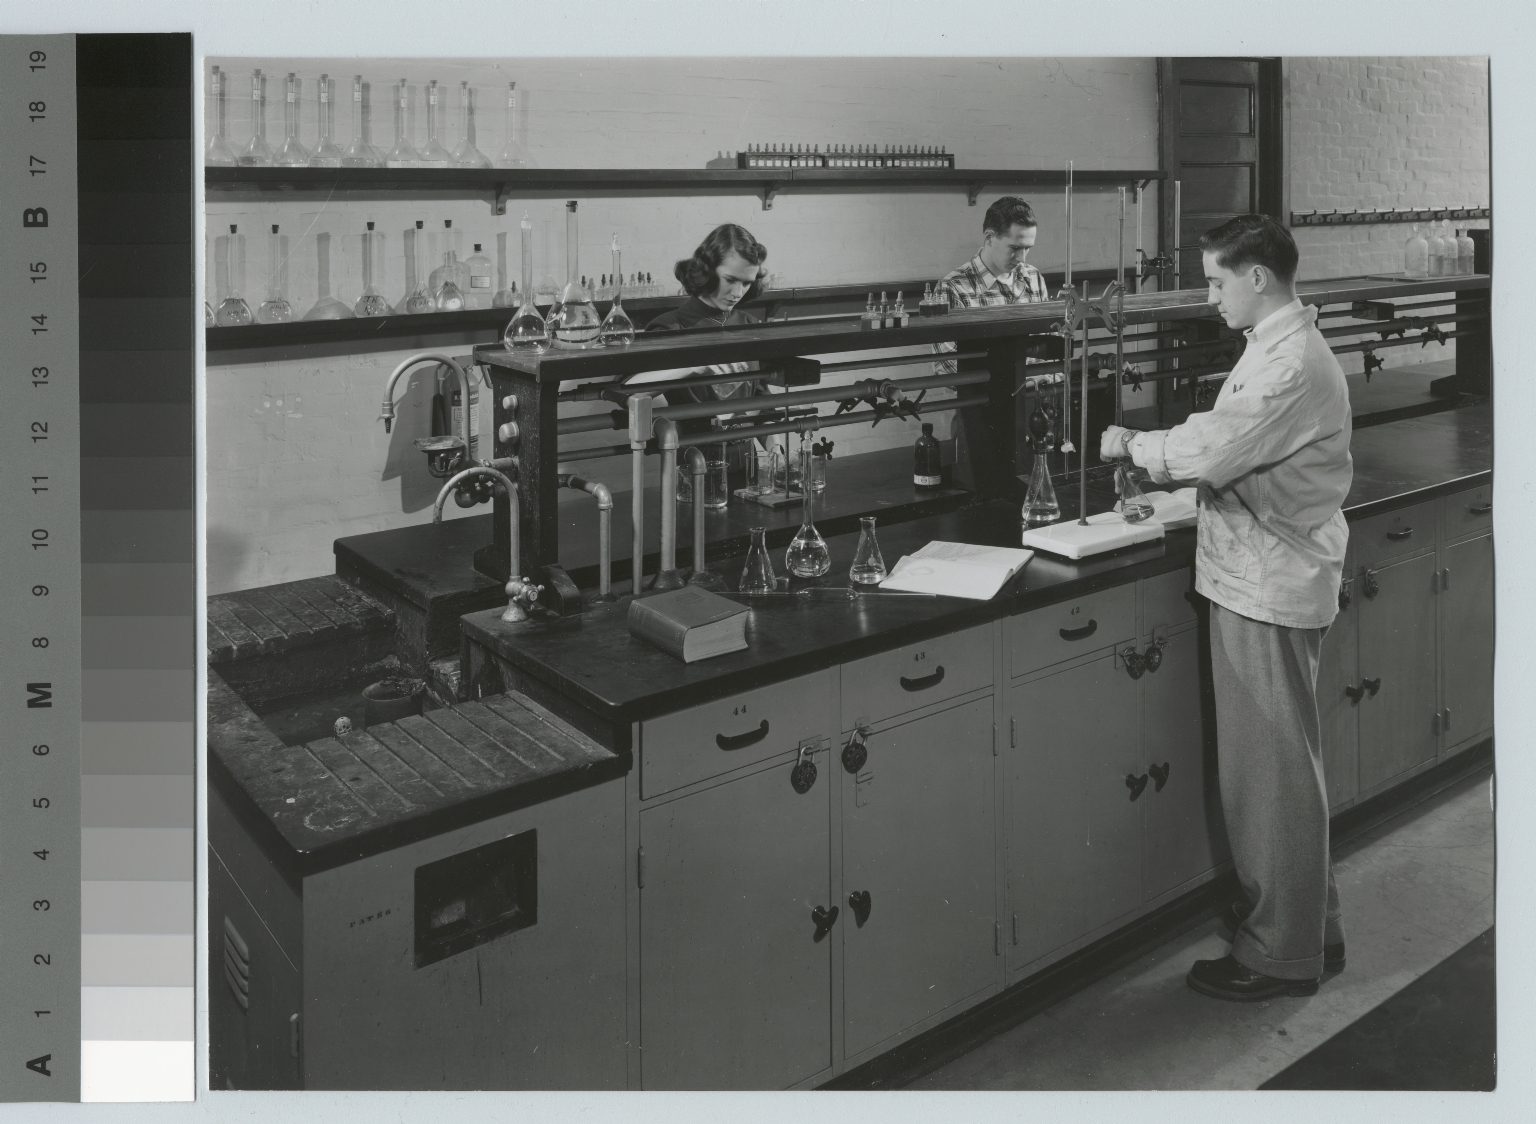 Academics, chemistry, three Rochester Institute of Technology students working on experiments in a chemistry lab, [1945-1955]